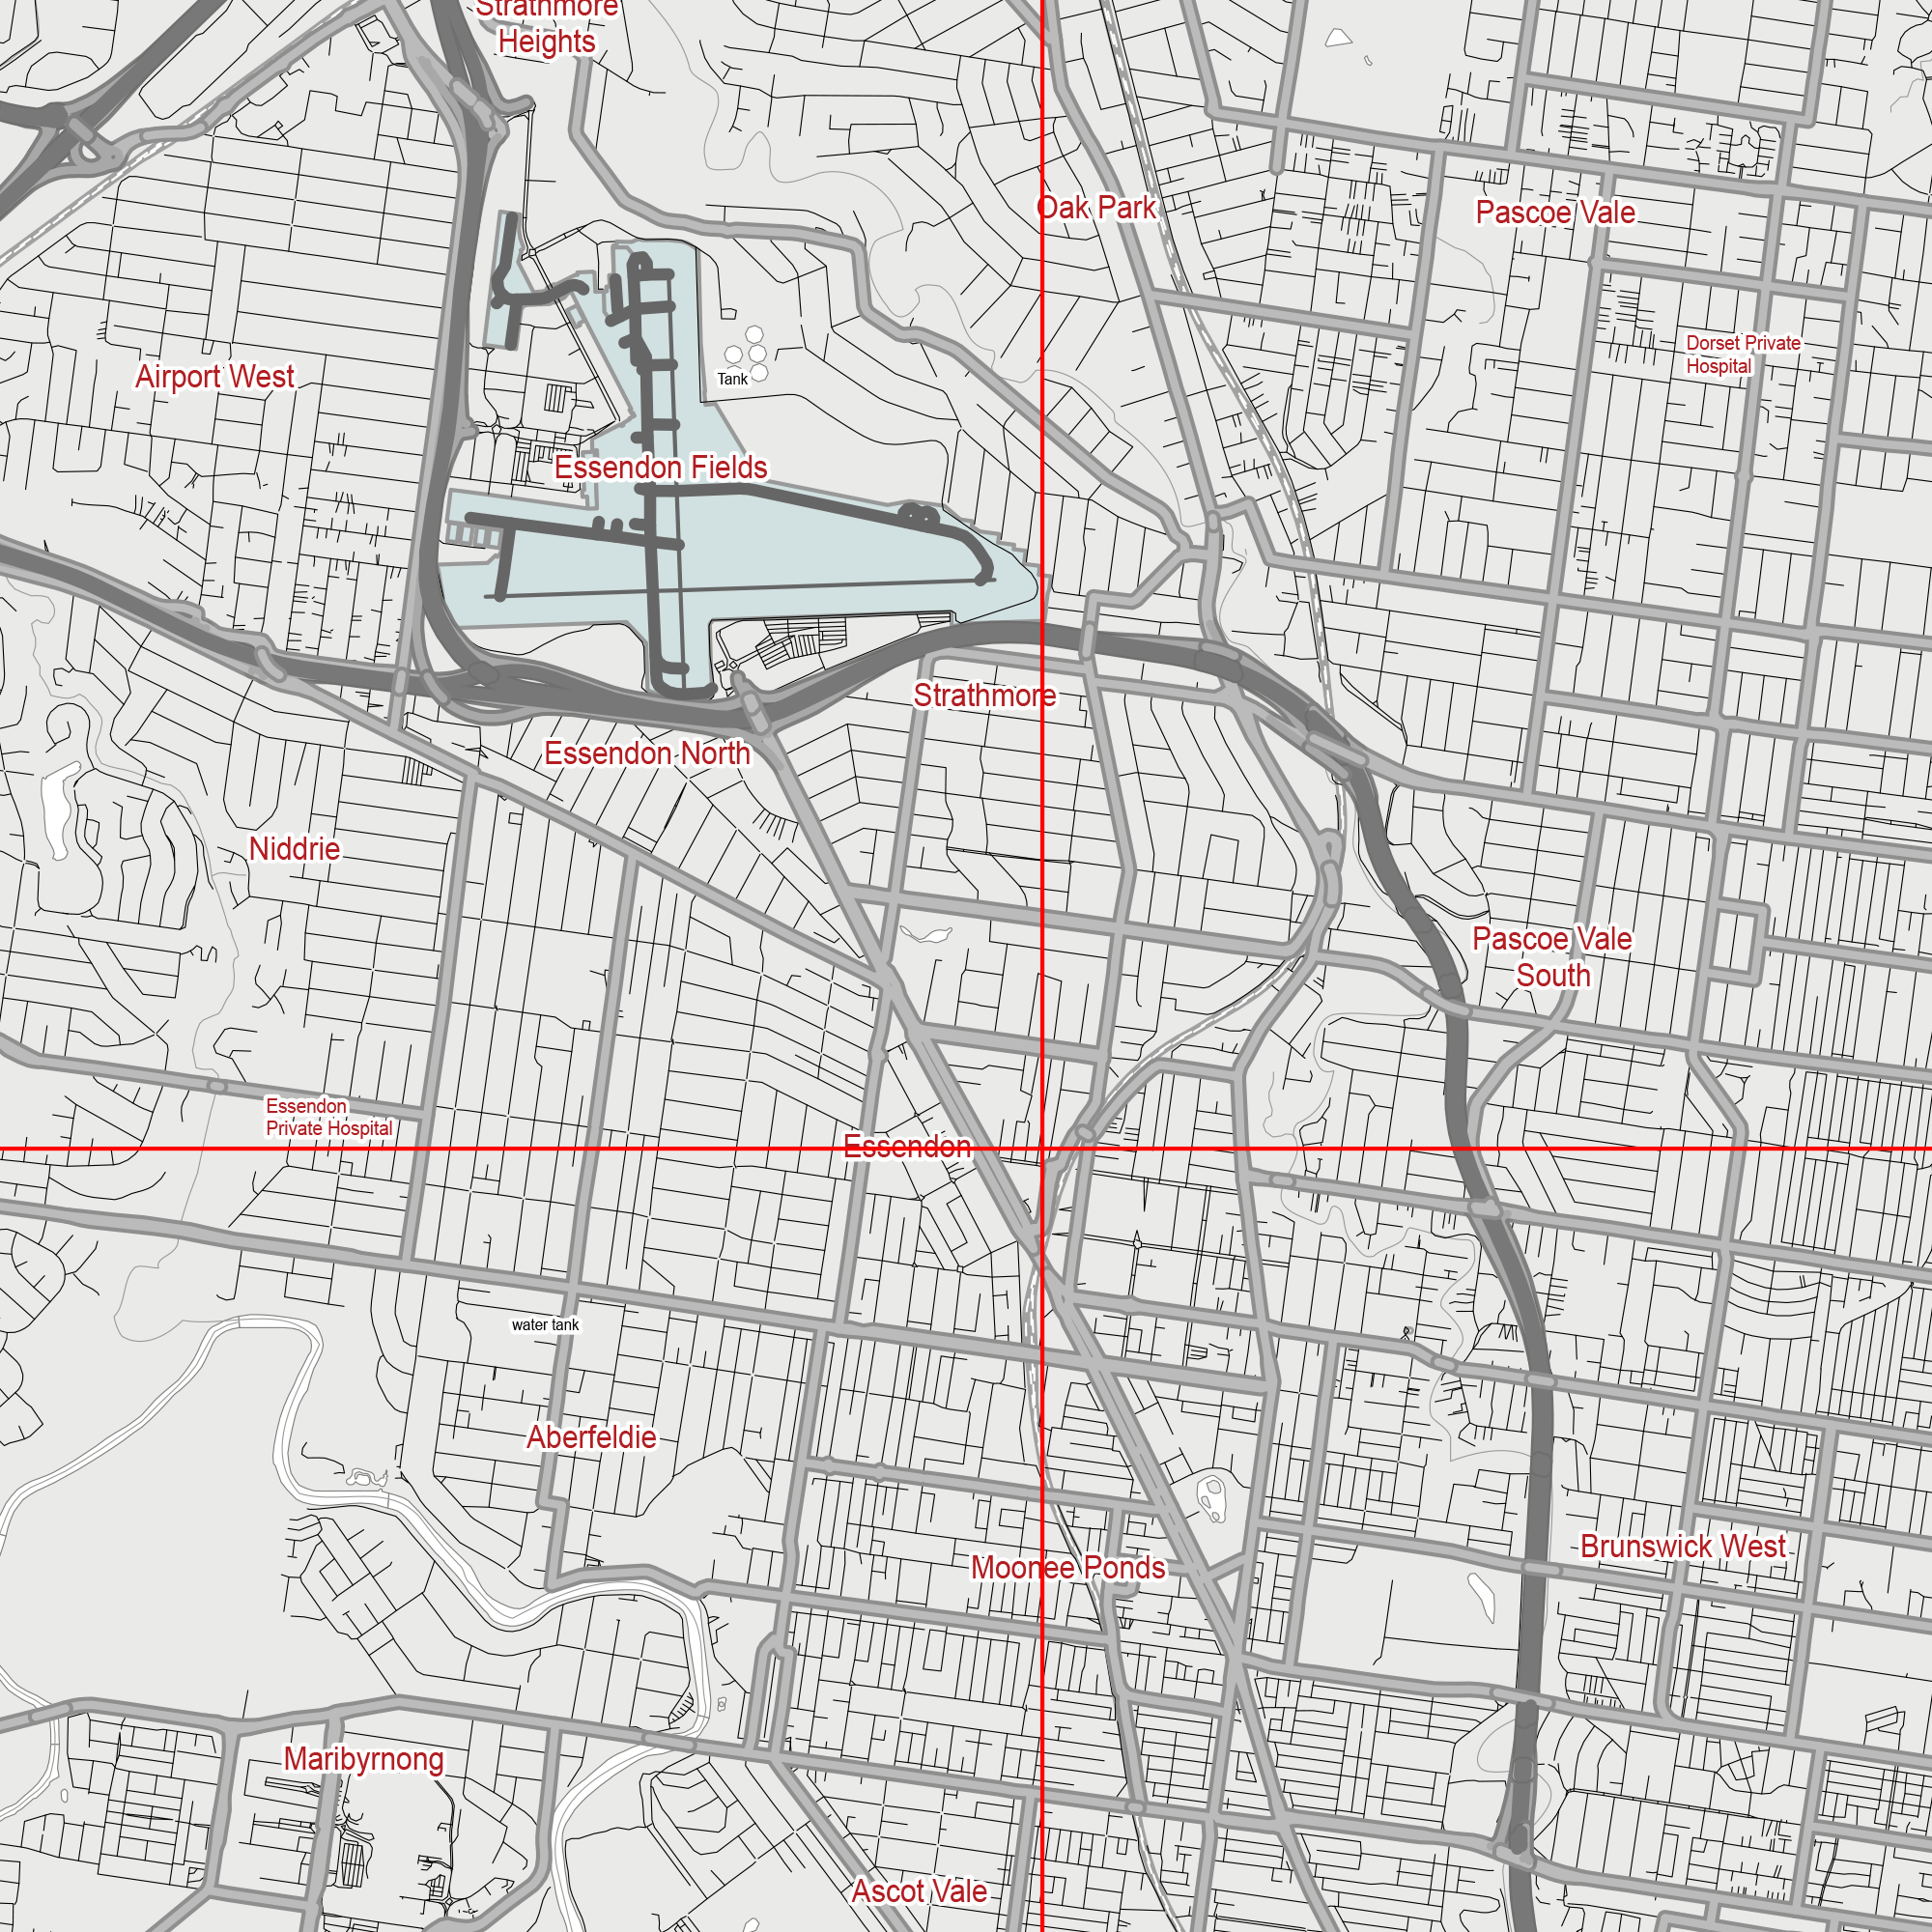 Melbourne Australia Map Vector City Plan Low Detailed (simple white) Street Map editable Adobe Illustrator in layers